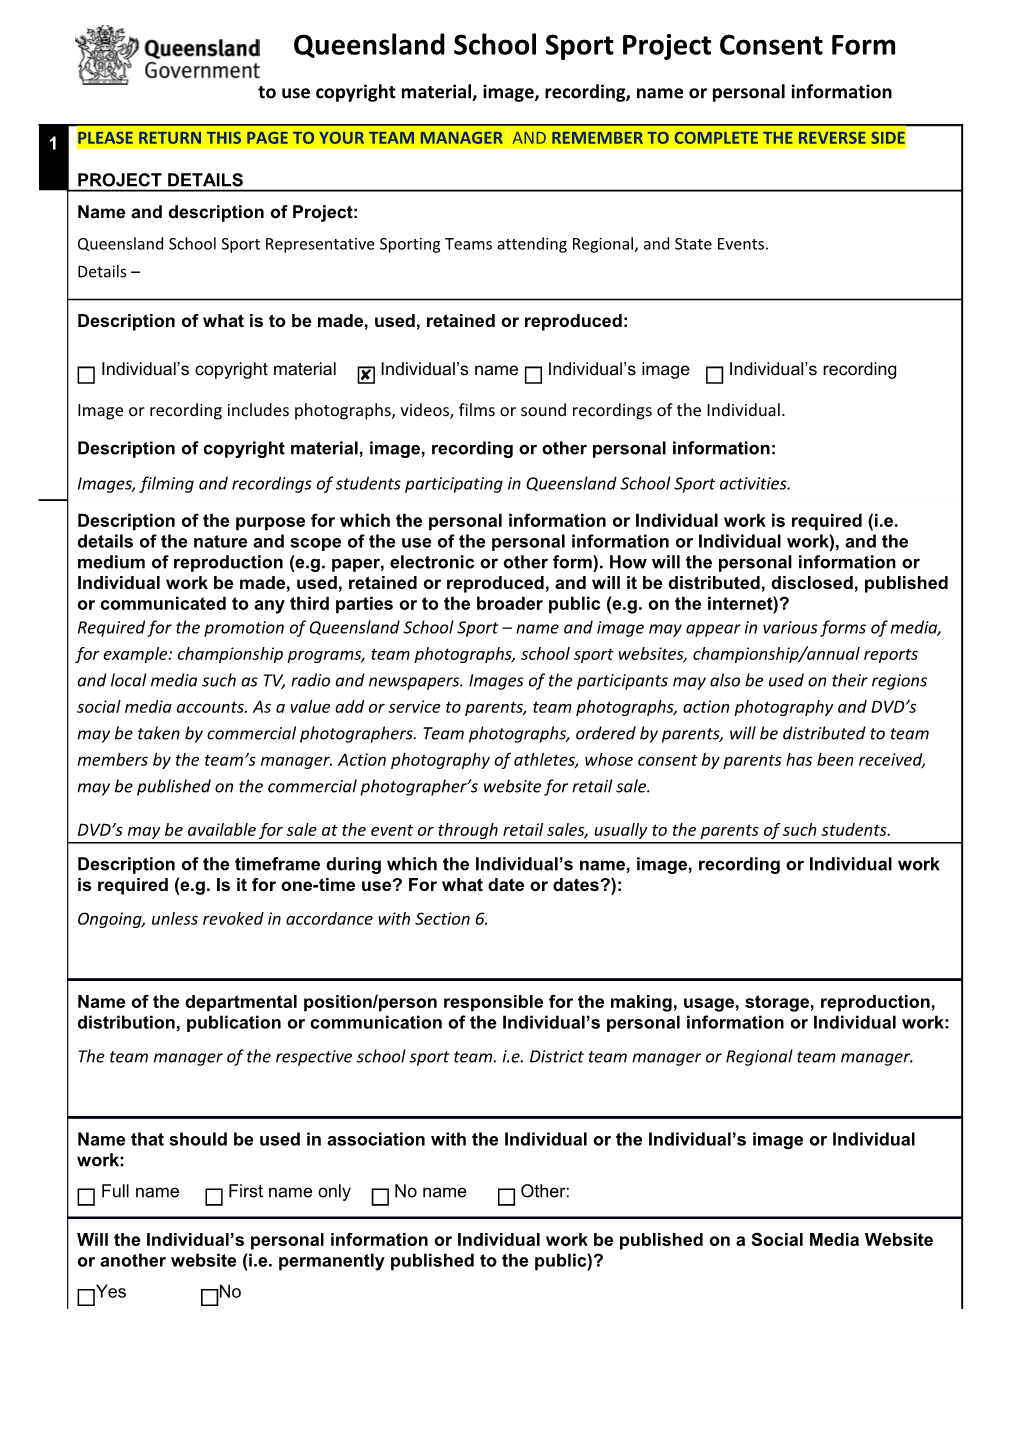 Student QSS Project Consent Form